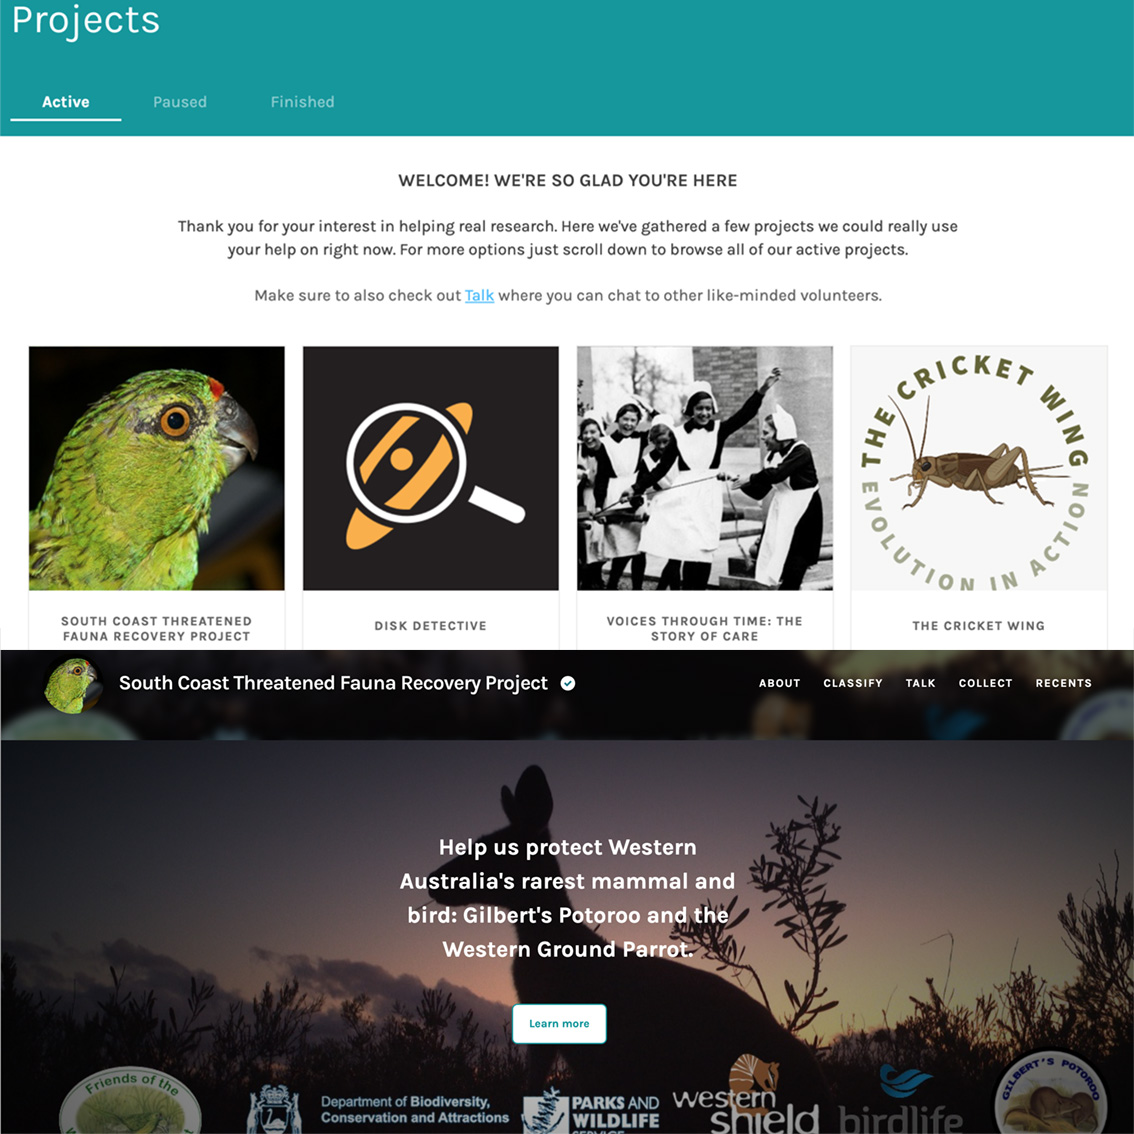 Exciting News: @the_zooniverse are featuring the South Coast Threatened Fauna Recovery Project on their homepage! 3096 volunteers are currently helping monitor feral predators & threatened species @ #TwoPeoplesBay. Join them & have fun IDing some animals zooniverse.org/projects/abbst…